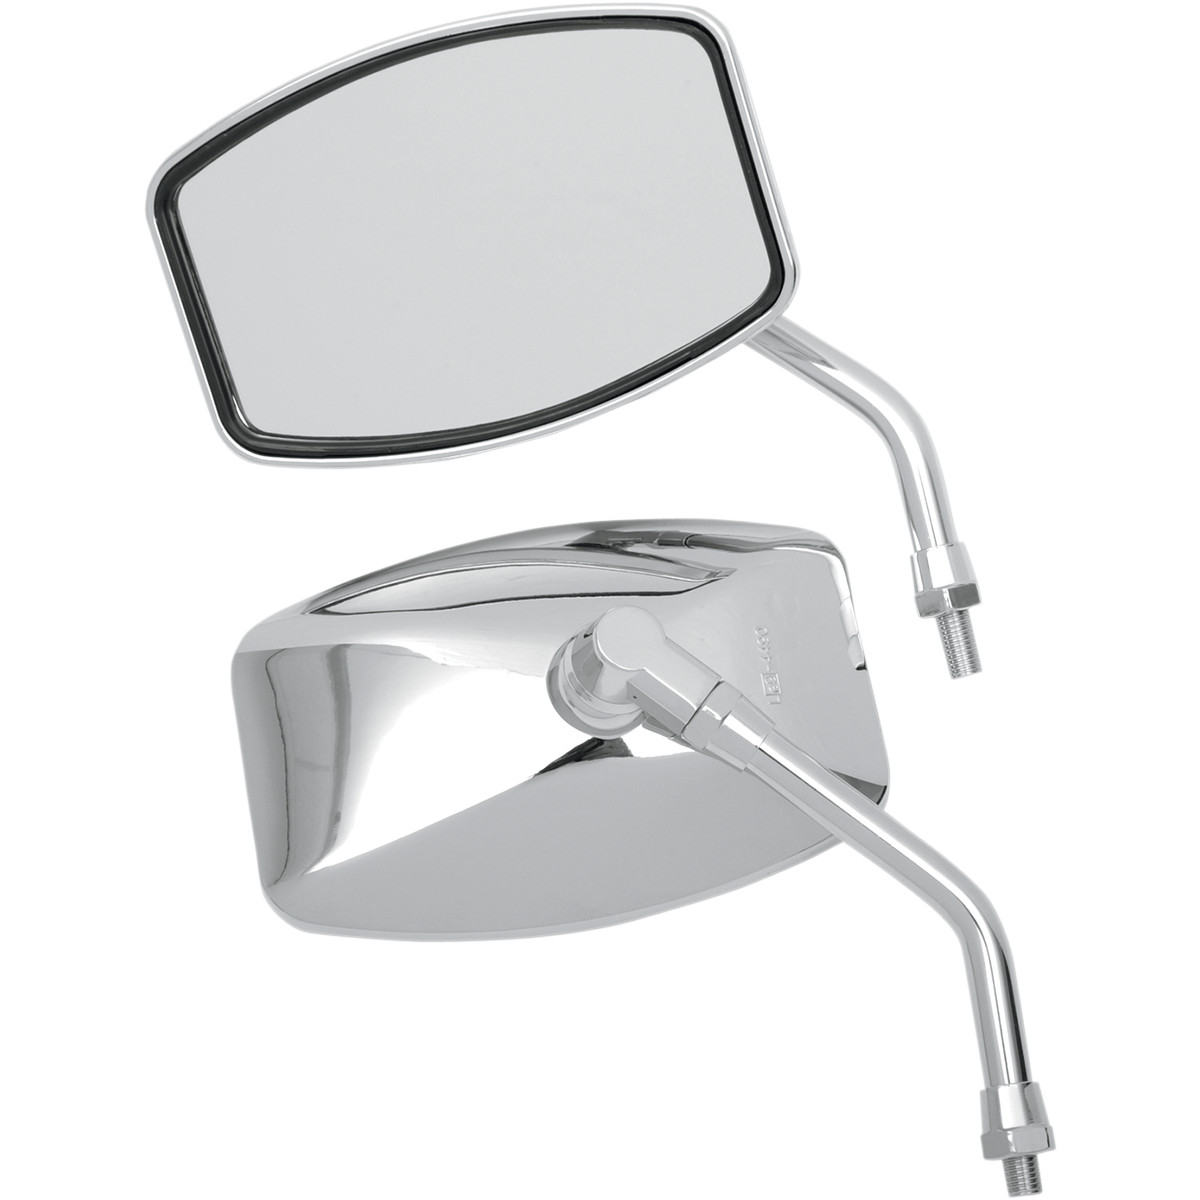 Chrome Motorcycle Rear View Side Mirrors 10mm For Honda Goldwing Valkyrie F6C